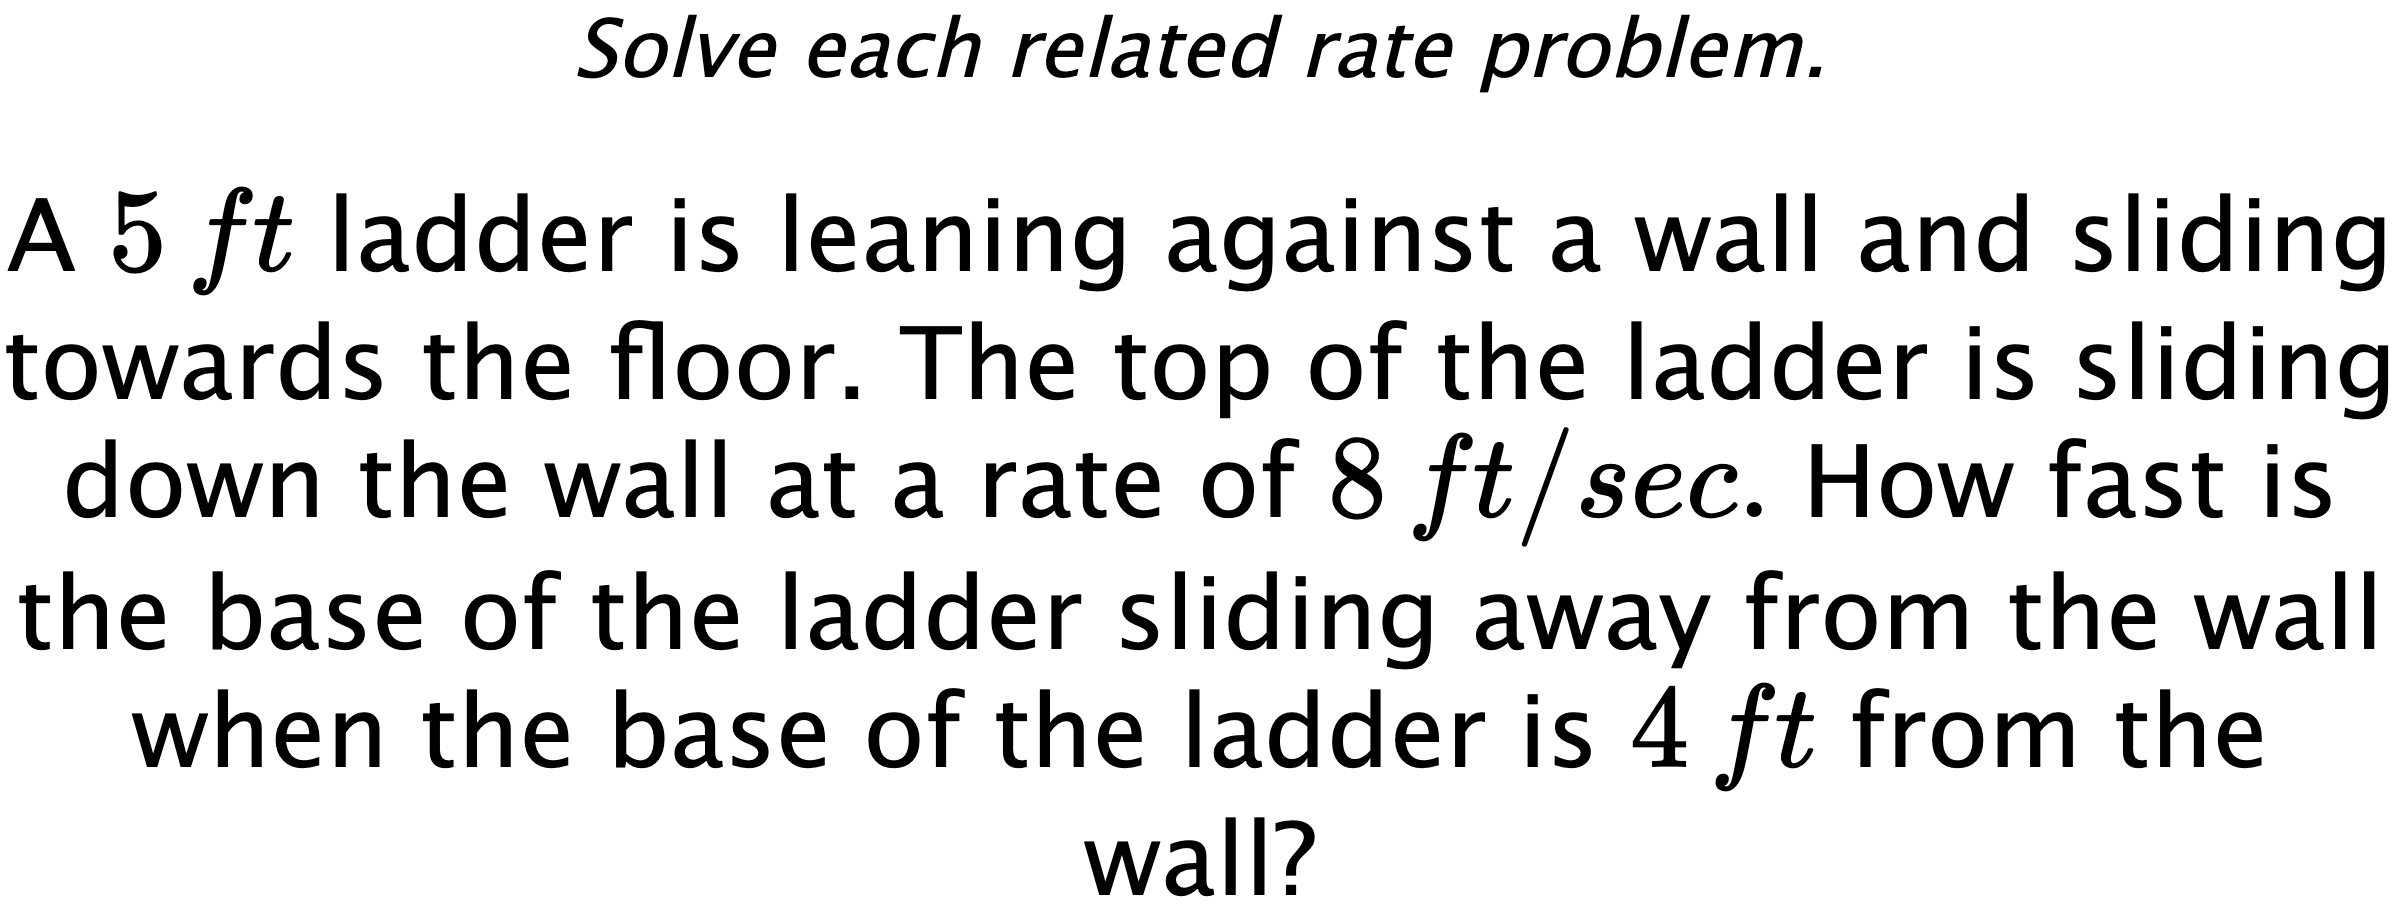 Solve each related rate problem. A $5\,ft$ ladder is leaning against a wall and sliding towards the floor. The top of the ladder is sliding down the wall at a rate of $8\,ft/sec.$ How fast is the base of the ladder sliding away from the wall when the base of the ladder is $4\,ft$ from the wall?